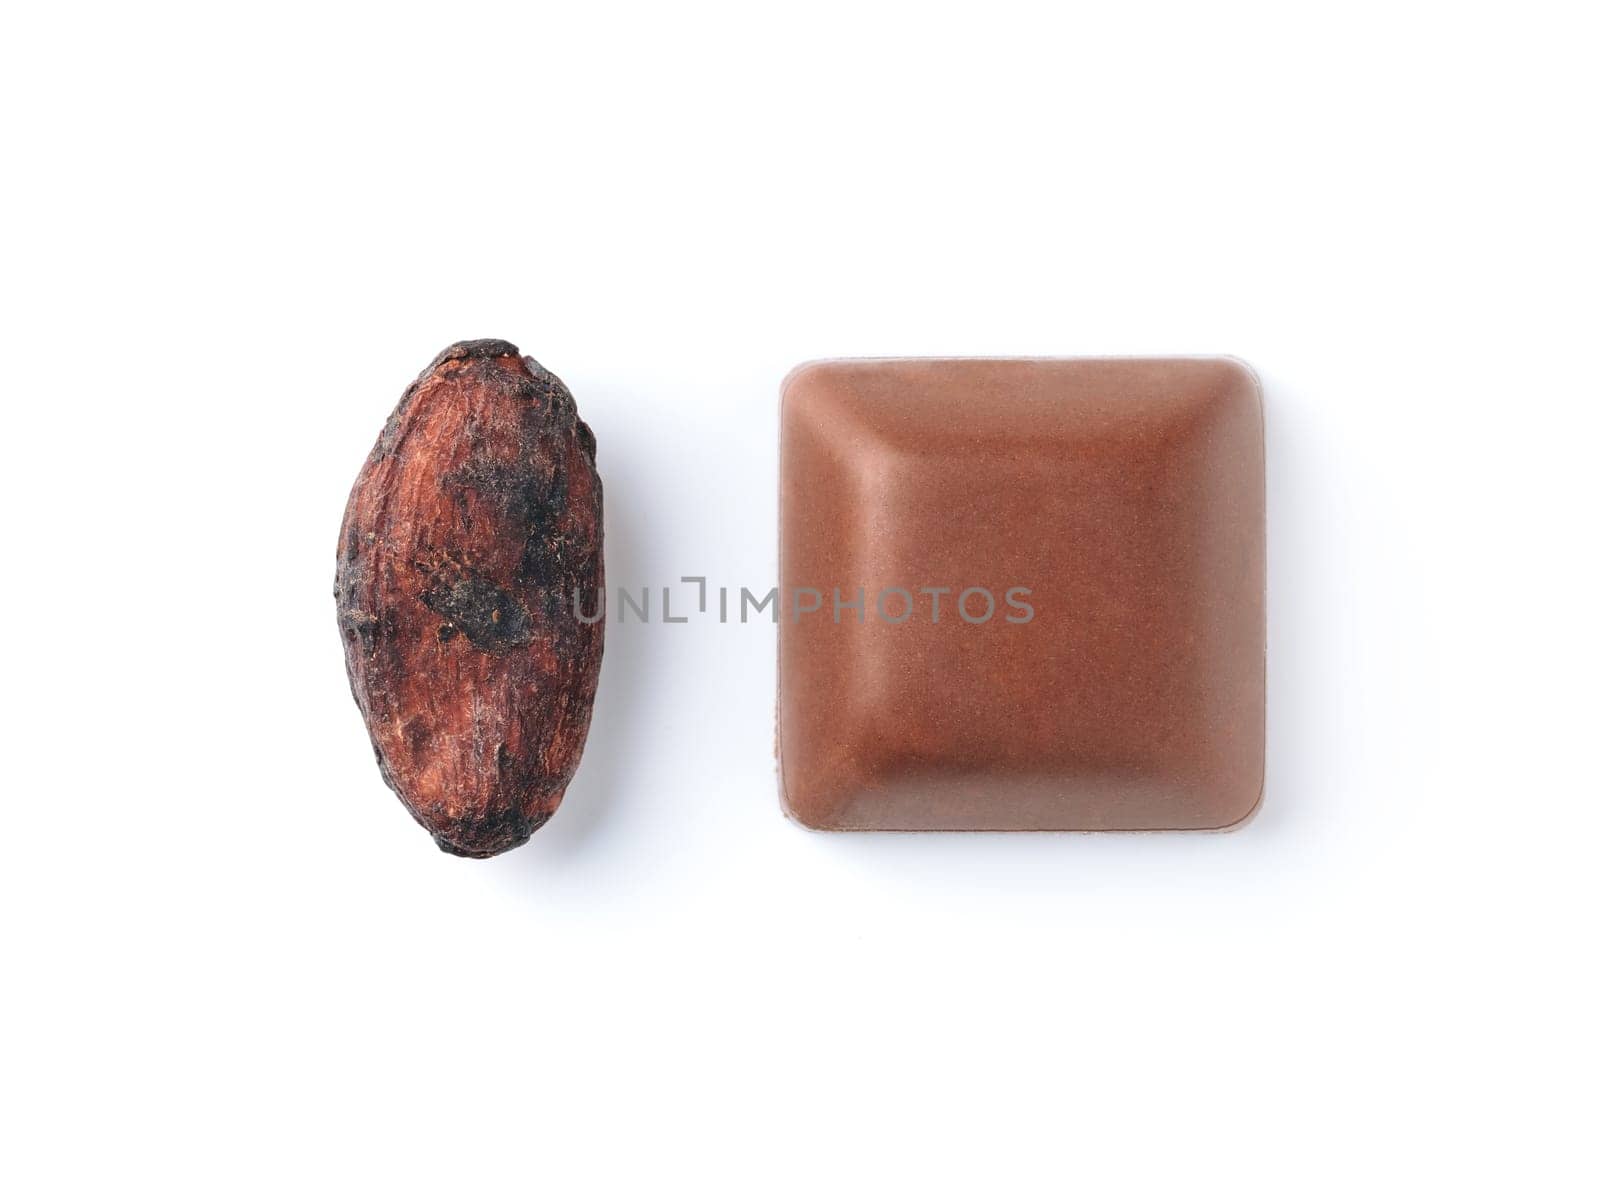 Raw cacao bean and chocolate piece on white background. Isolated on white with clipping path. Copy space for text.